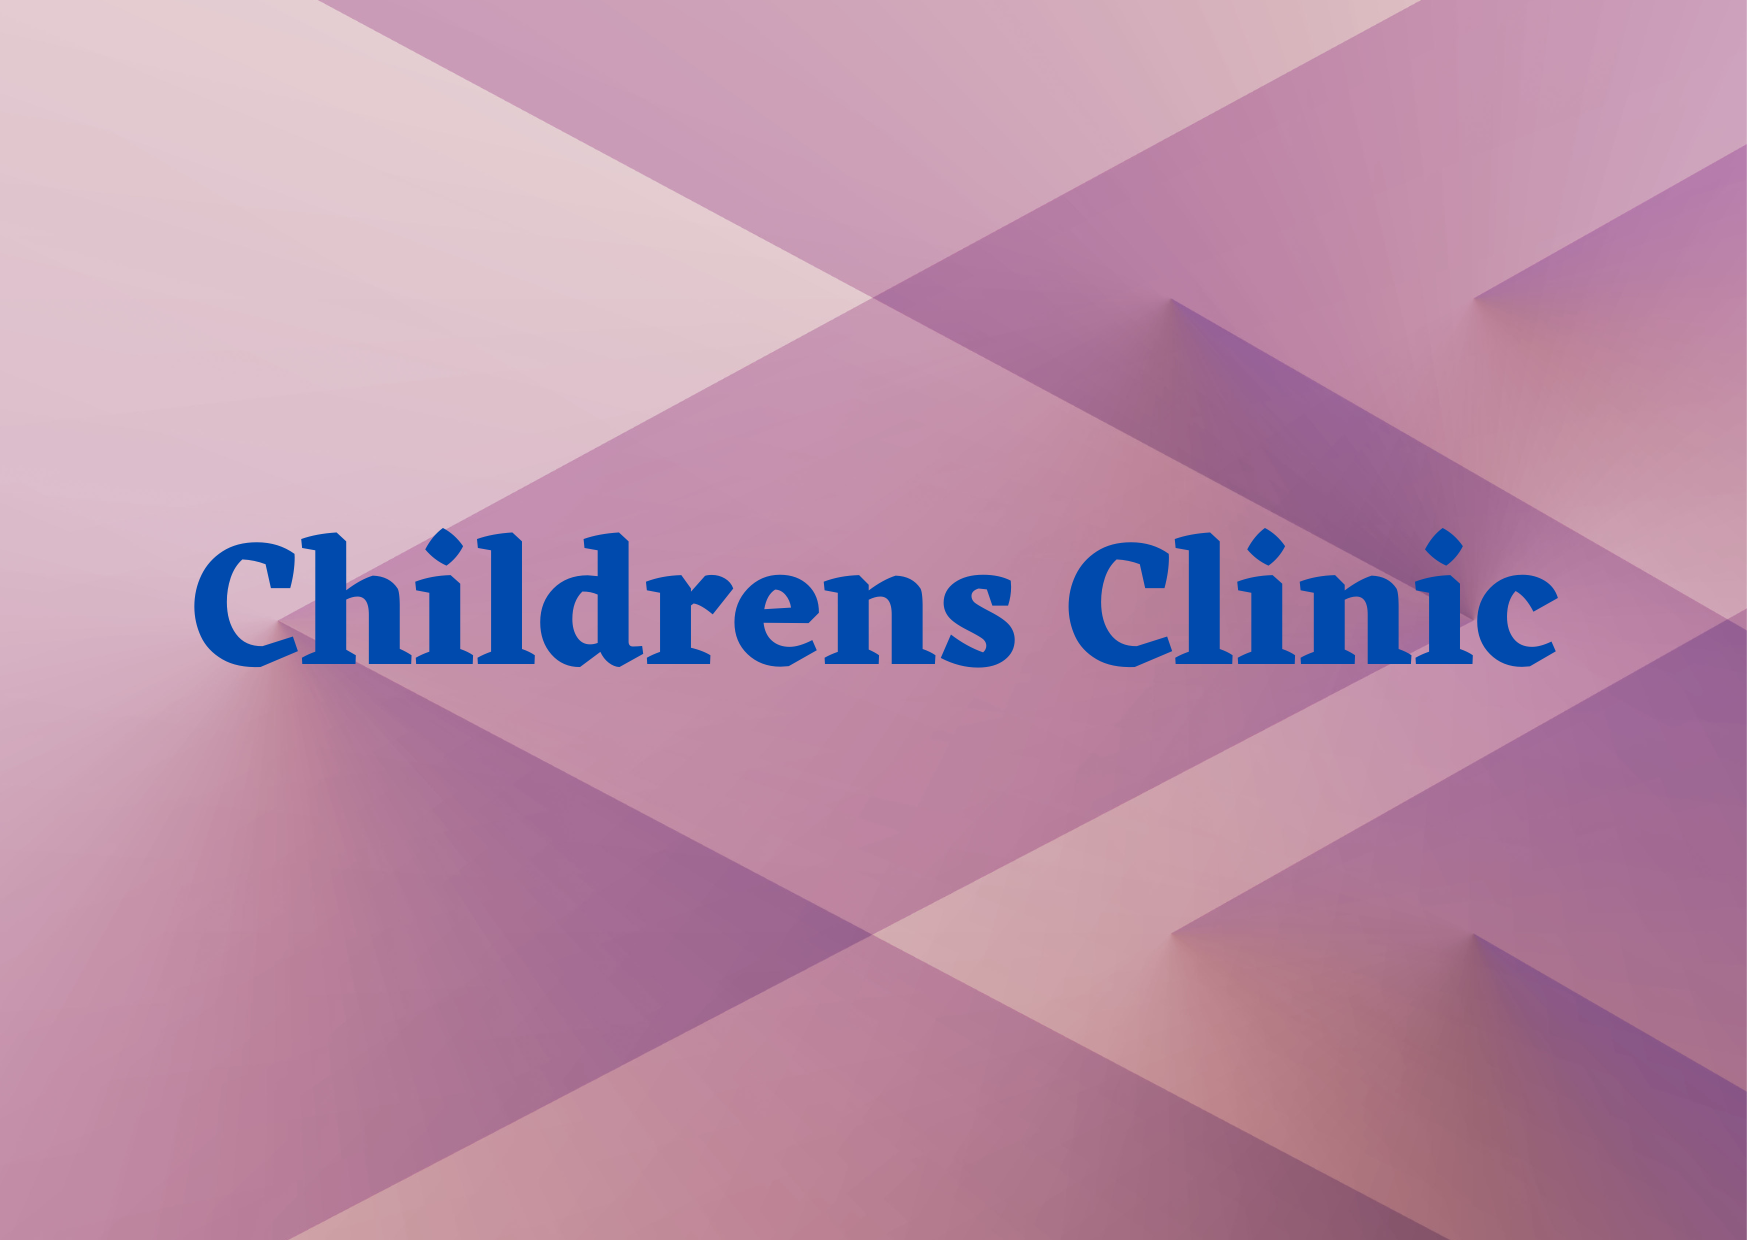 Childrens Clinic 